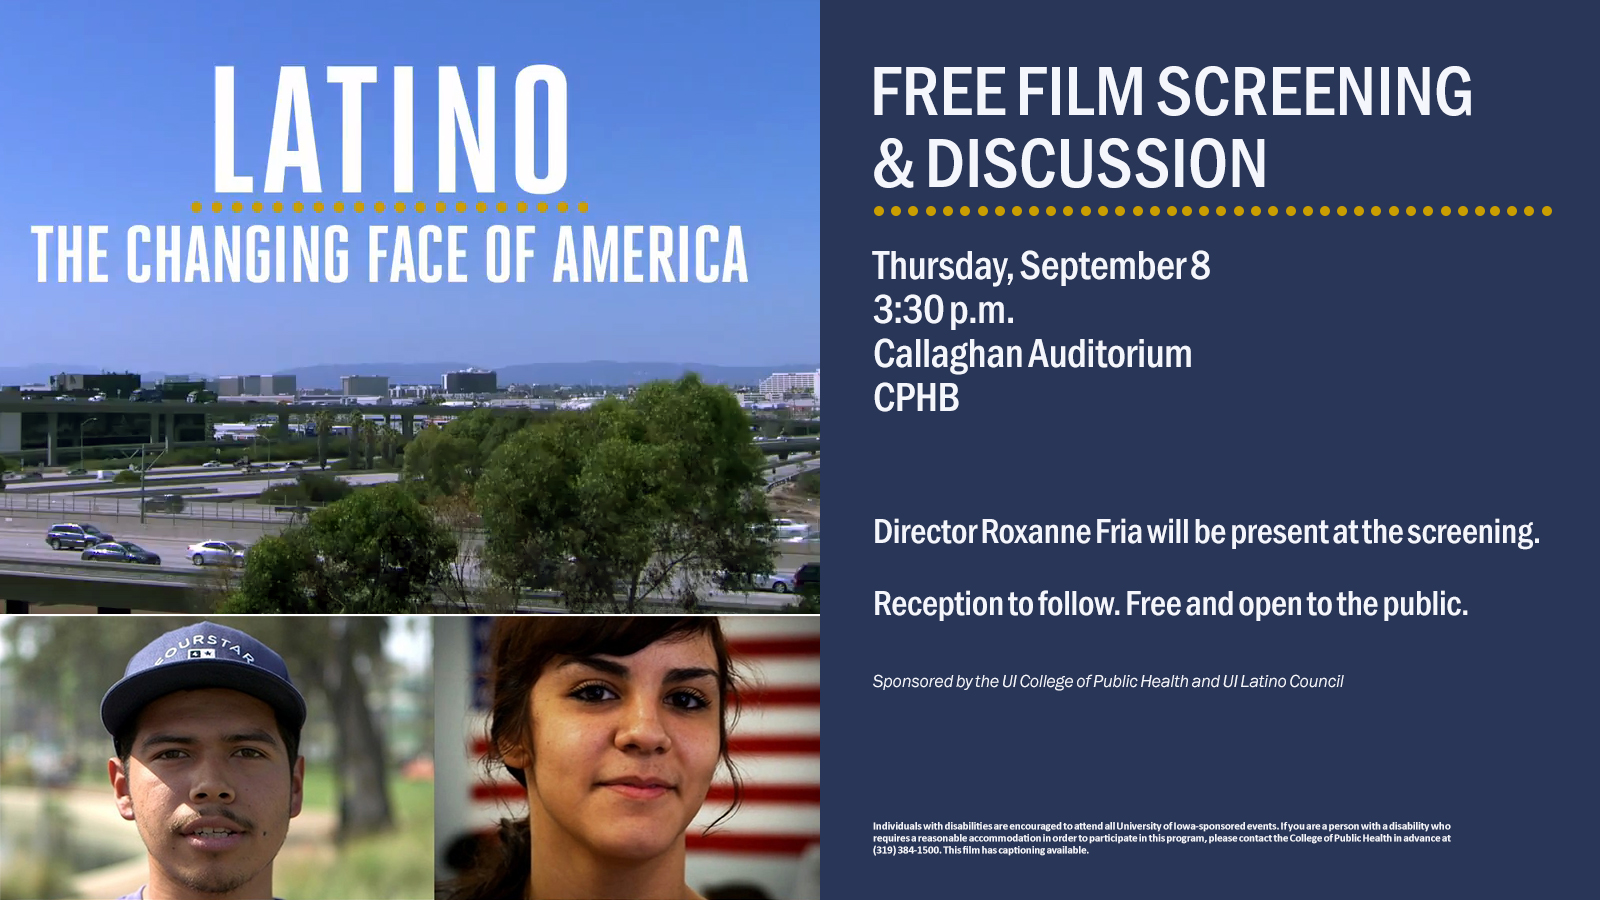 Latino: The Changing Face of America free screening 